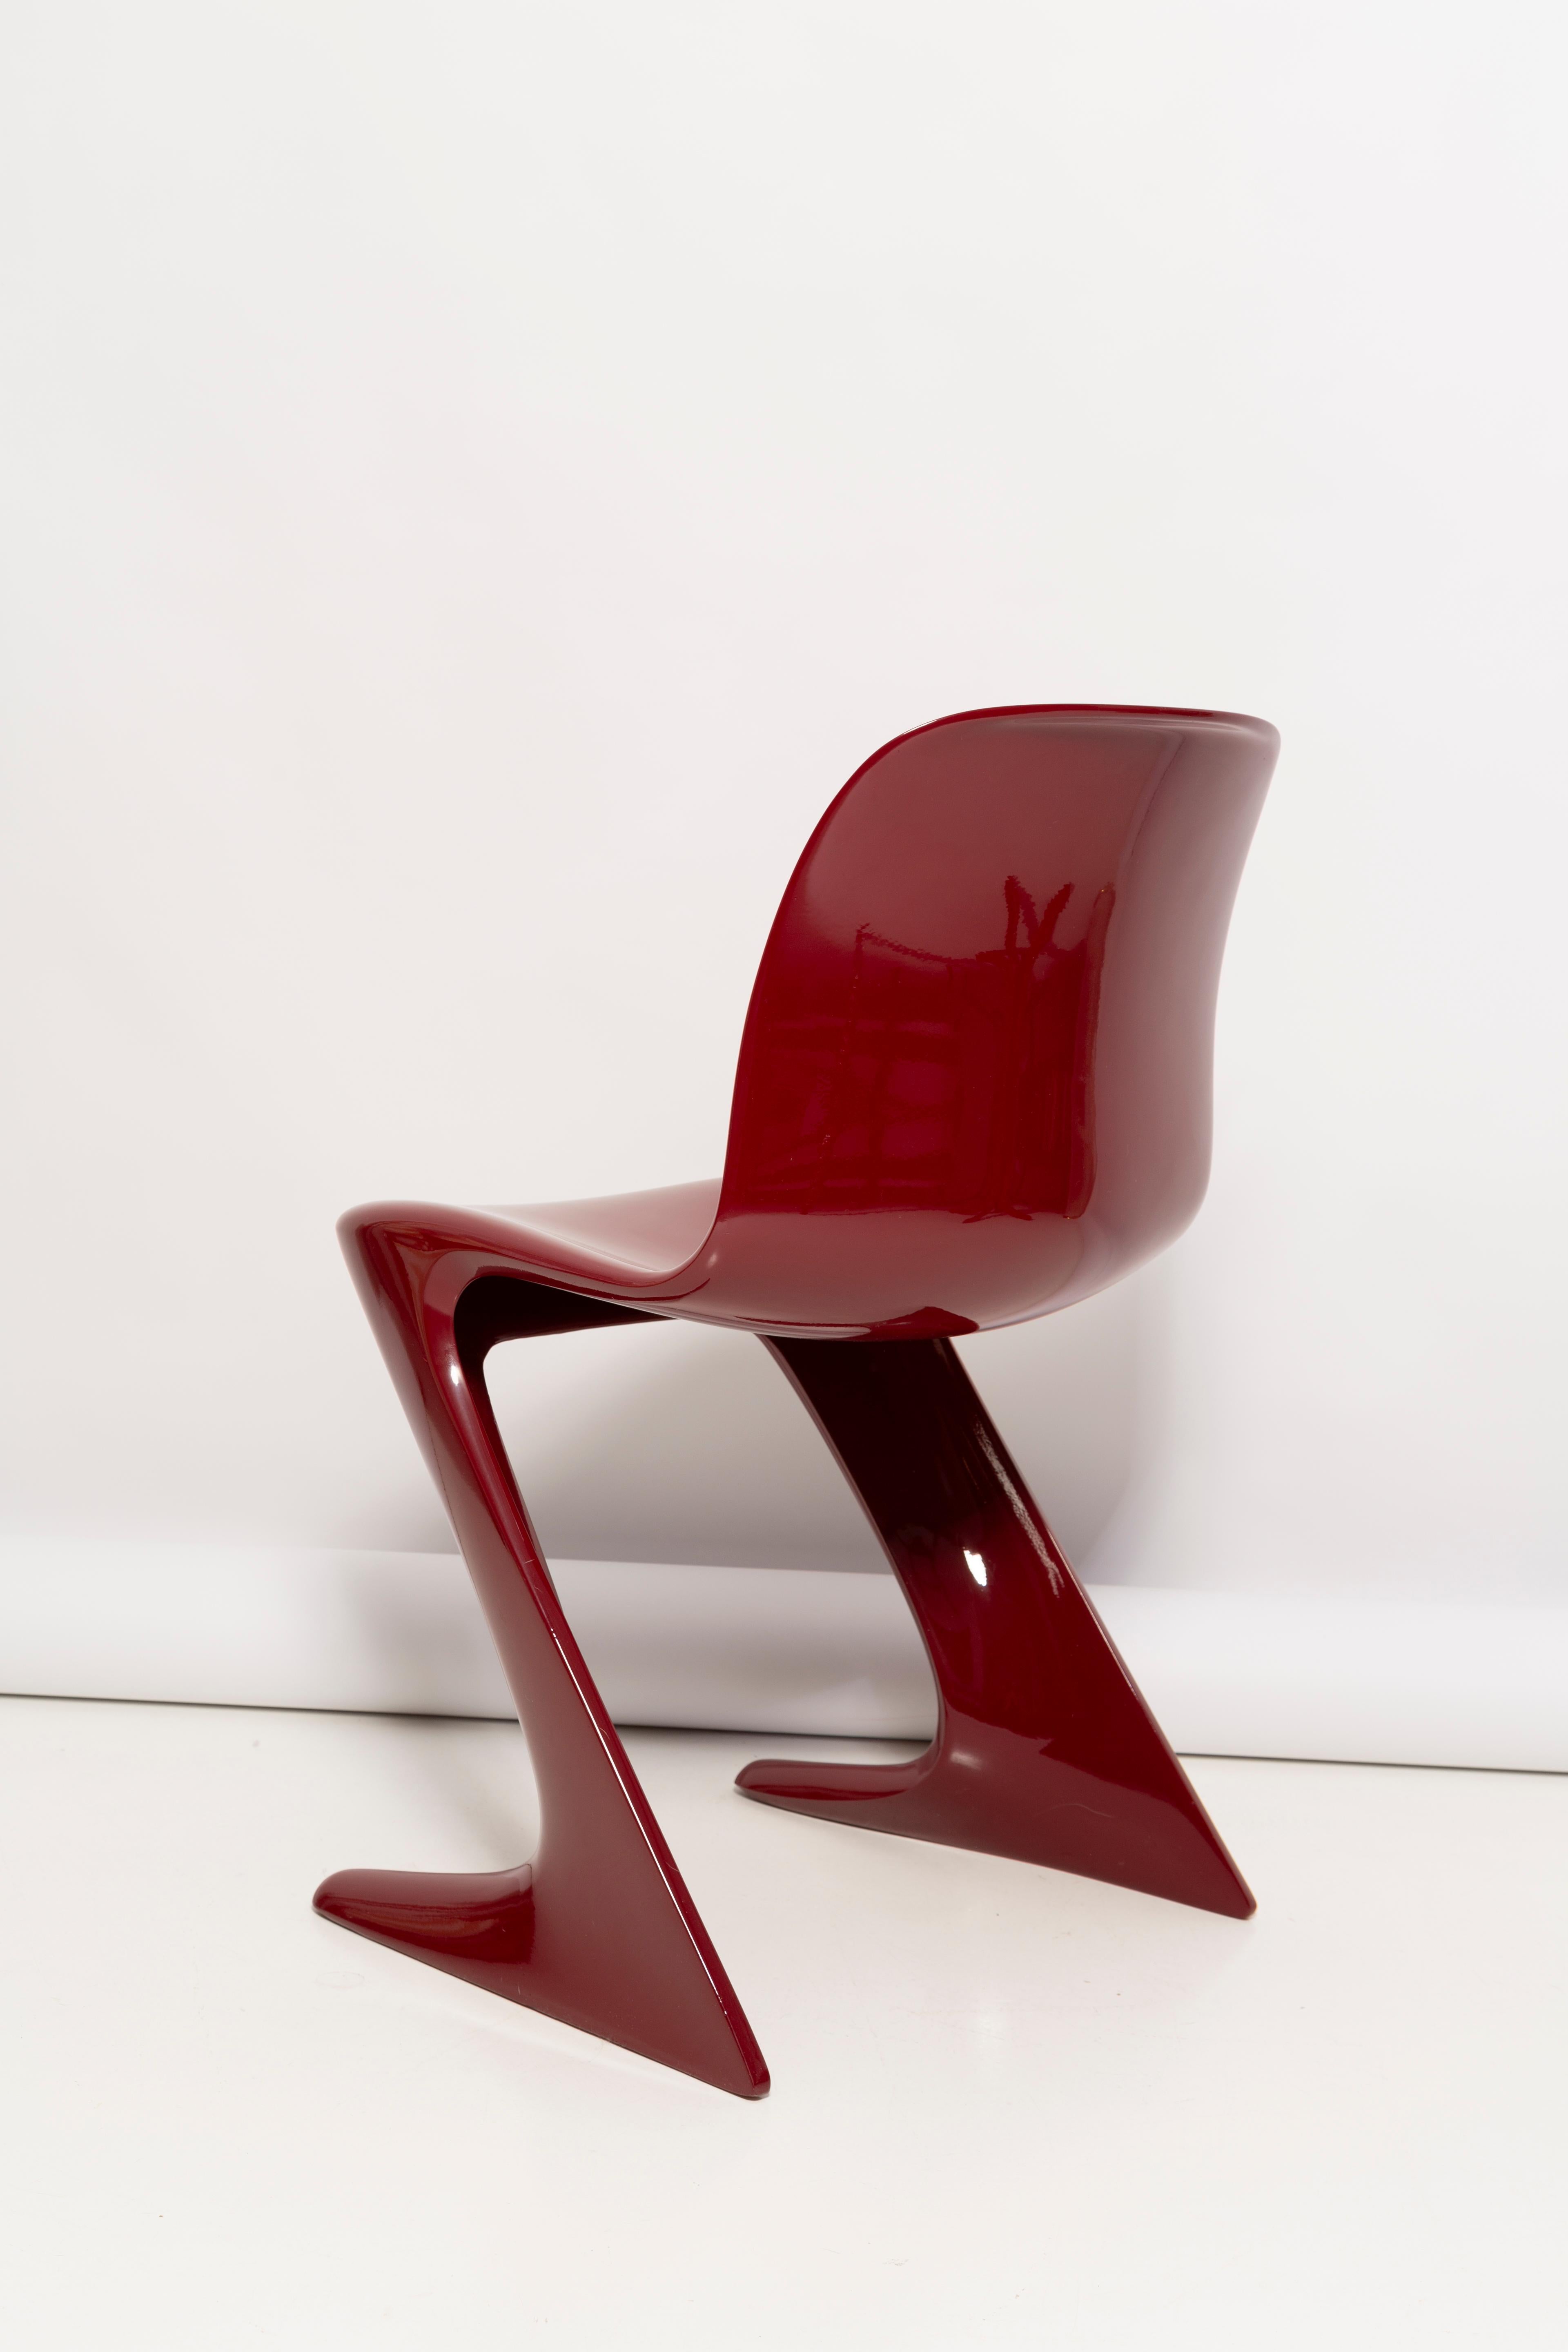 Pair of Dark Red Wine Kangaroo Chairs Designed by Ernst Moeckl, Germany, 1968 For Sale 2